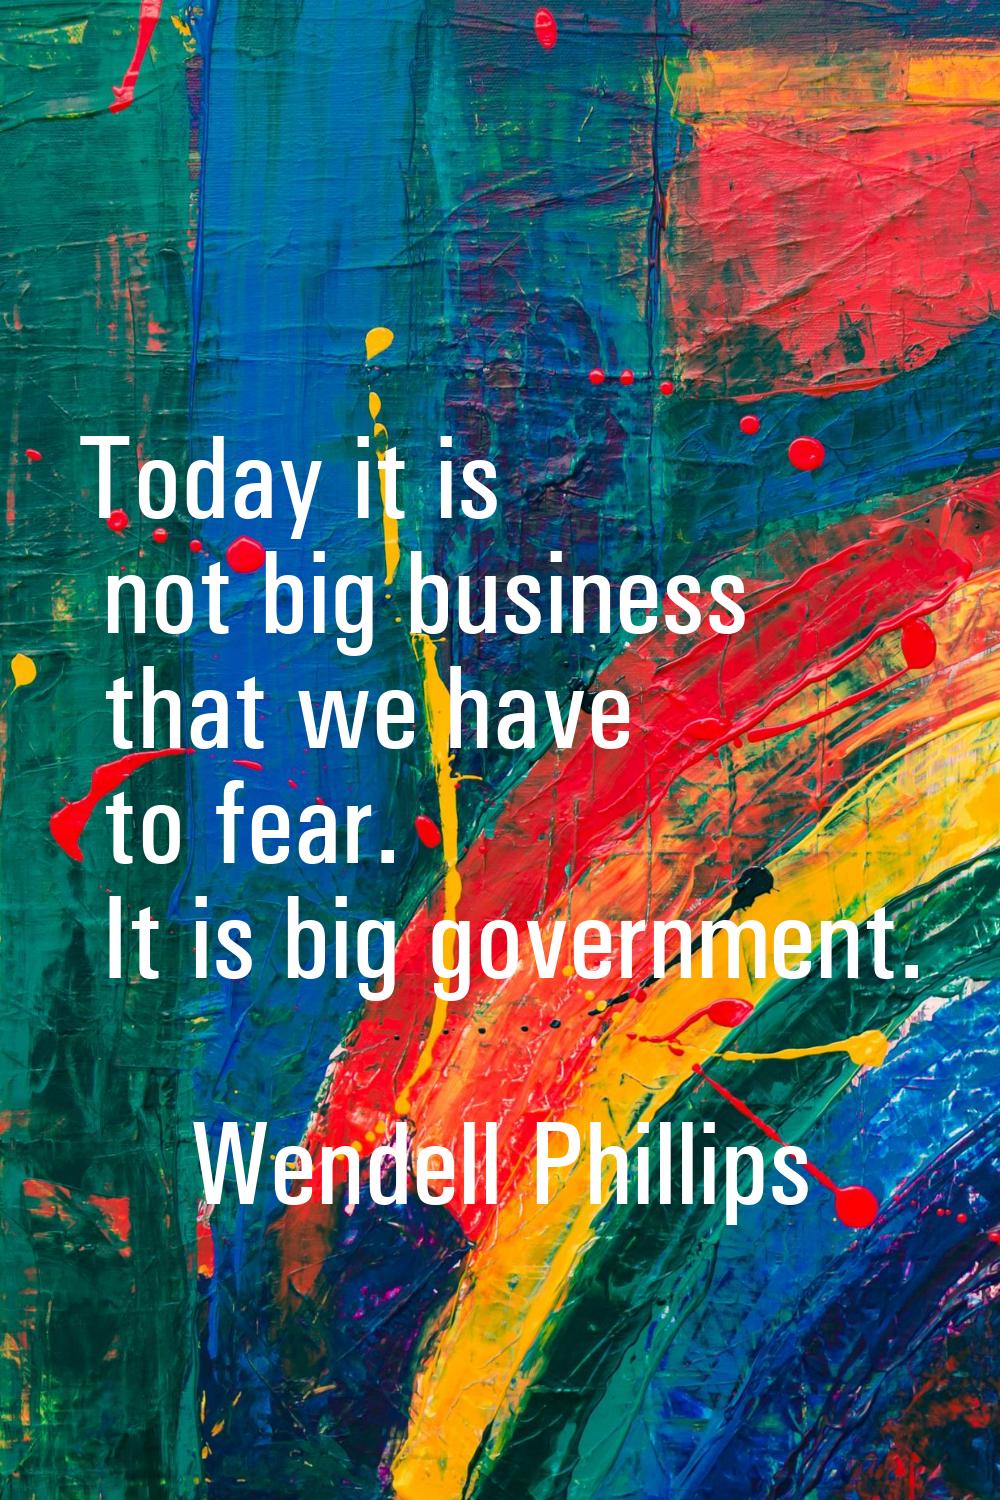 Today it is not big business that we have to fear. It is big government.